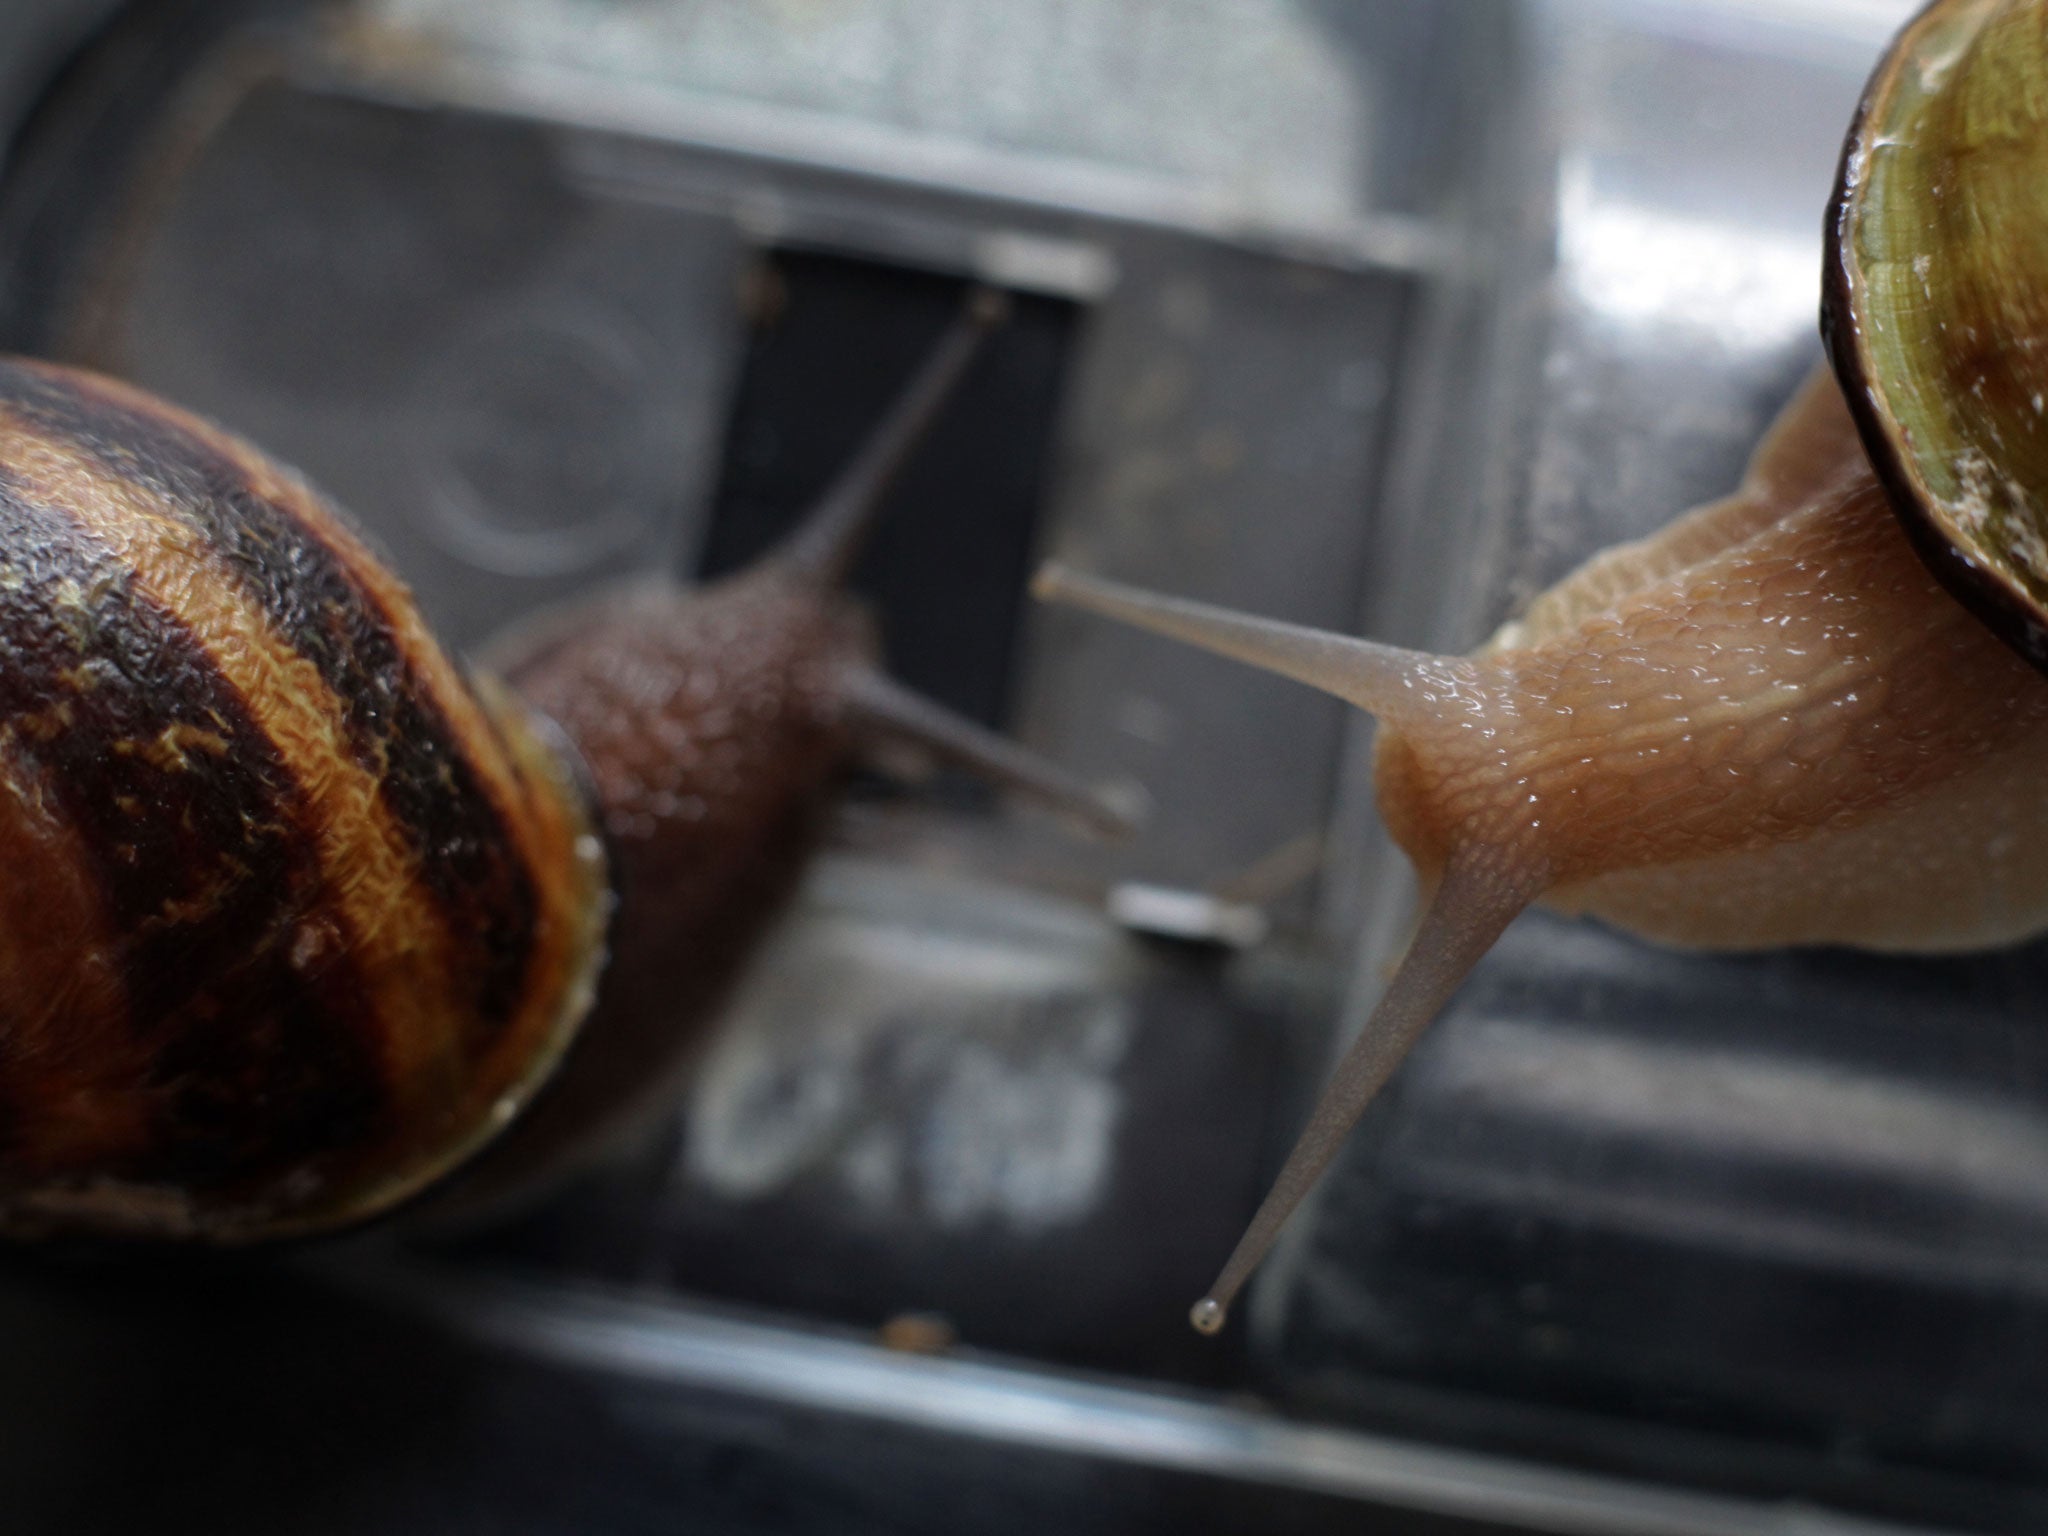 Large breeding snails of the 'gros gris' variety in Helen Howard's production unit